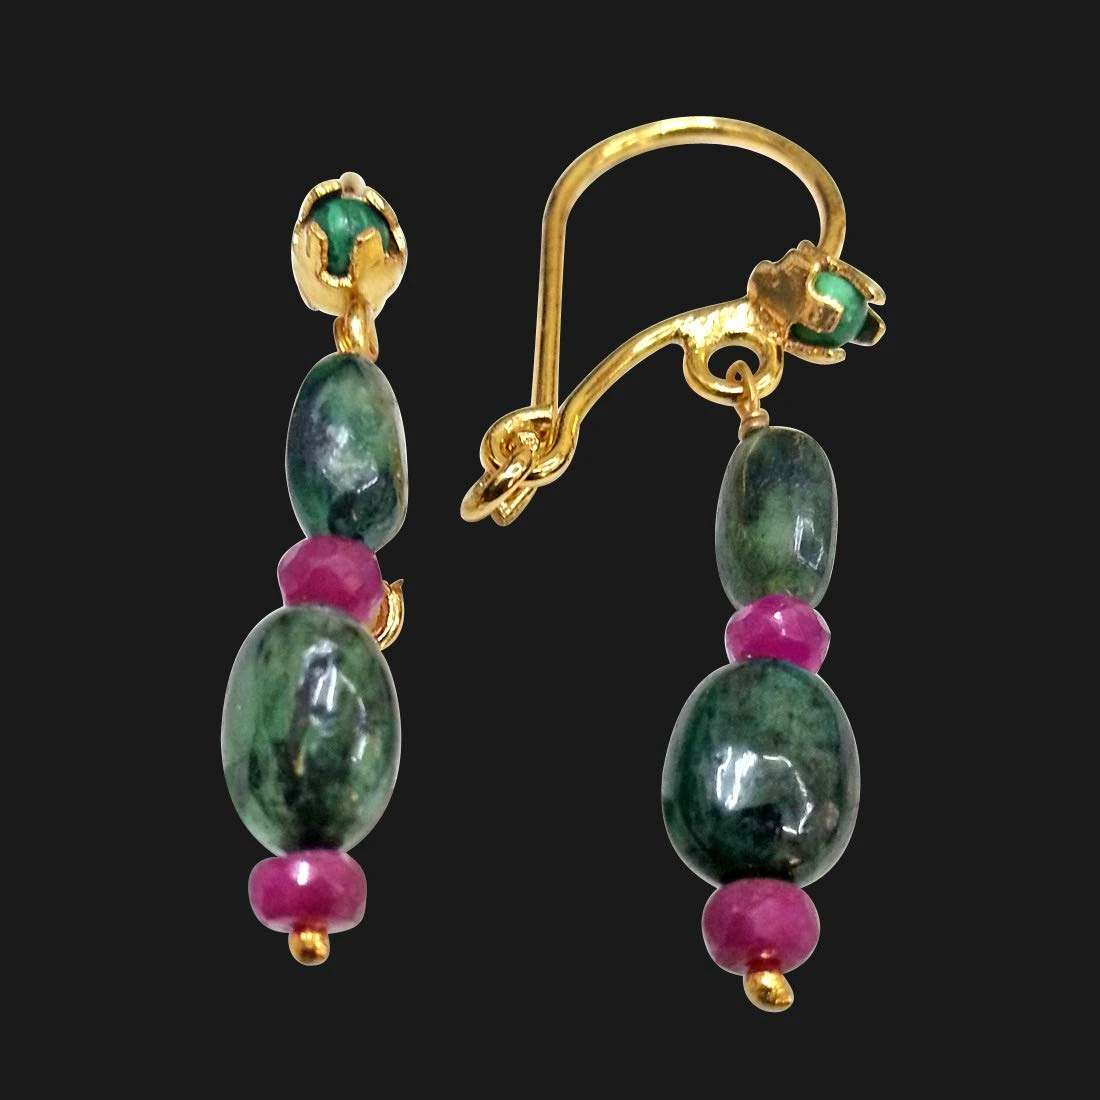 Enriching Elegance - Real Oval Emerald & Red Ruby Beads Hanging Earrings for Women (SE101)